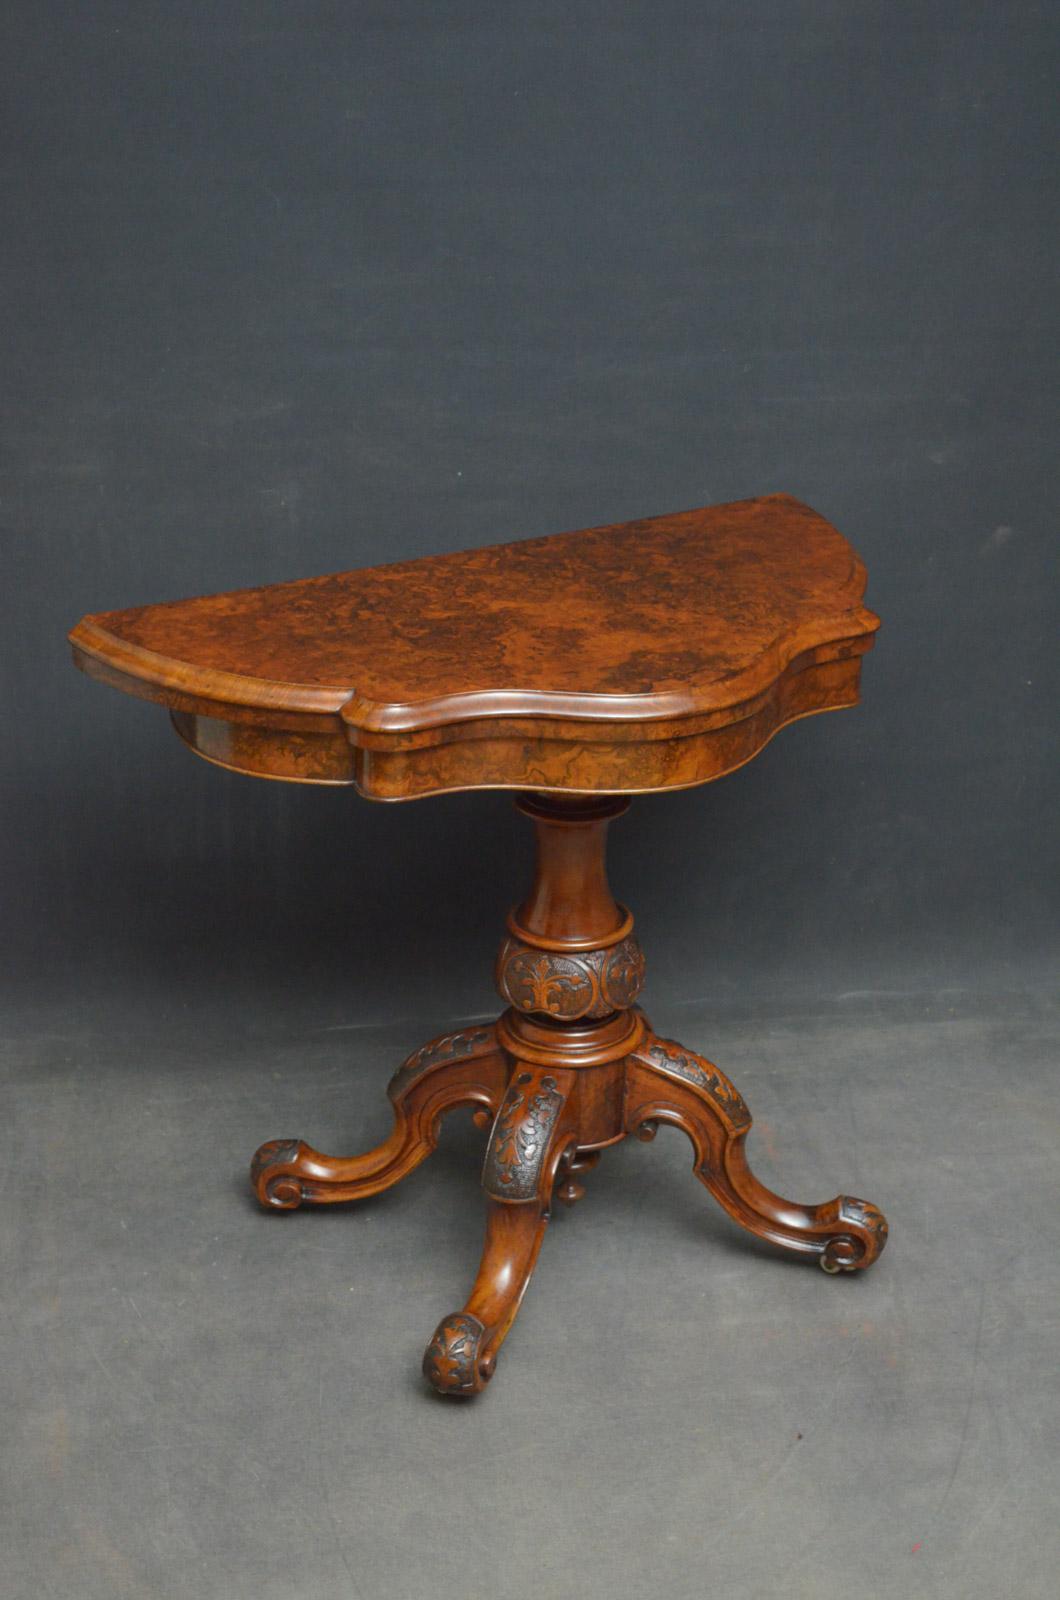 M00 attractive Victorian card table in burr walnut, having shaped, fold over top enclosing green baize games surface, standing on carved vase shaped column terminating in 4 downswept carved legs and castors.
This antique games table would make a